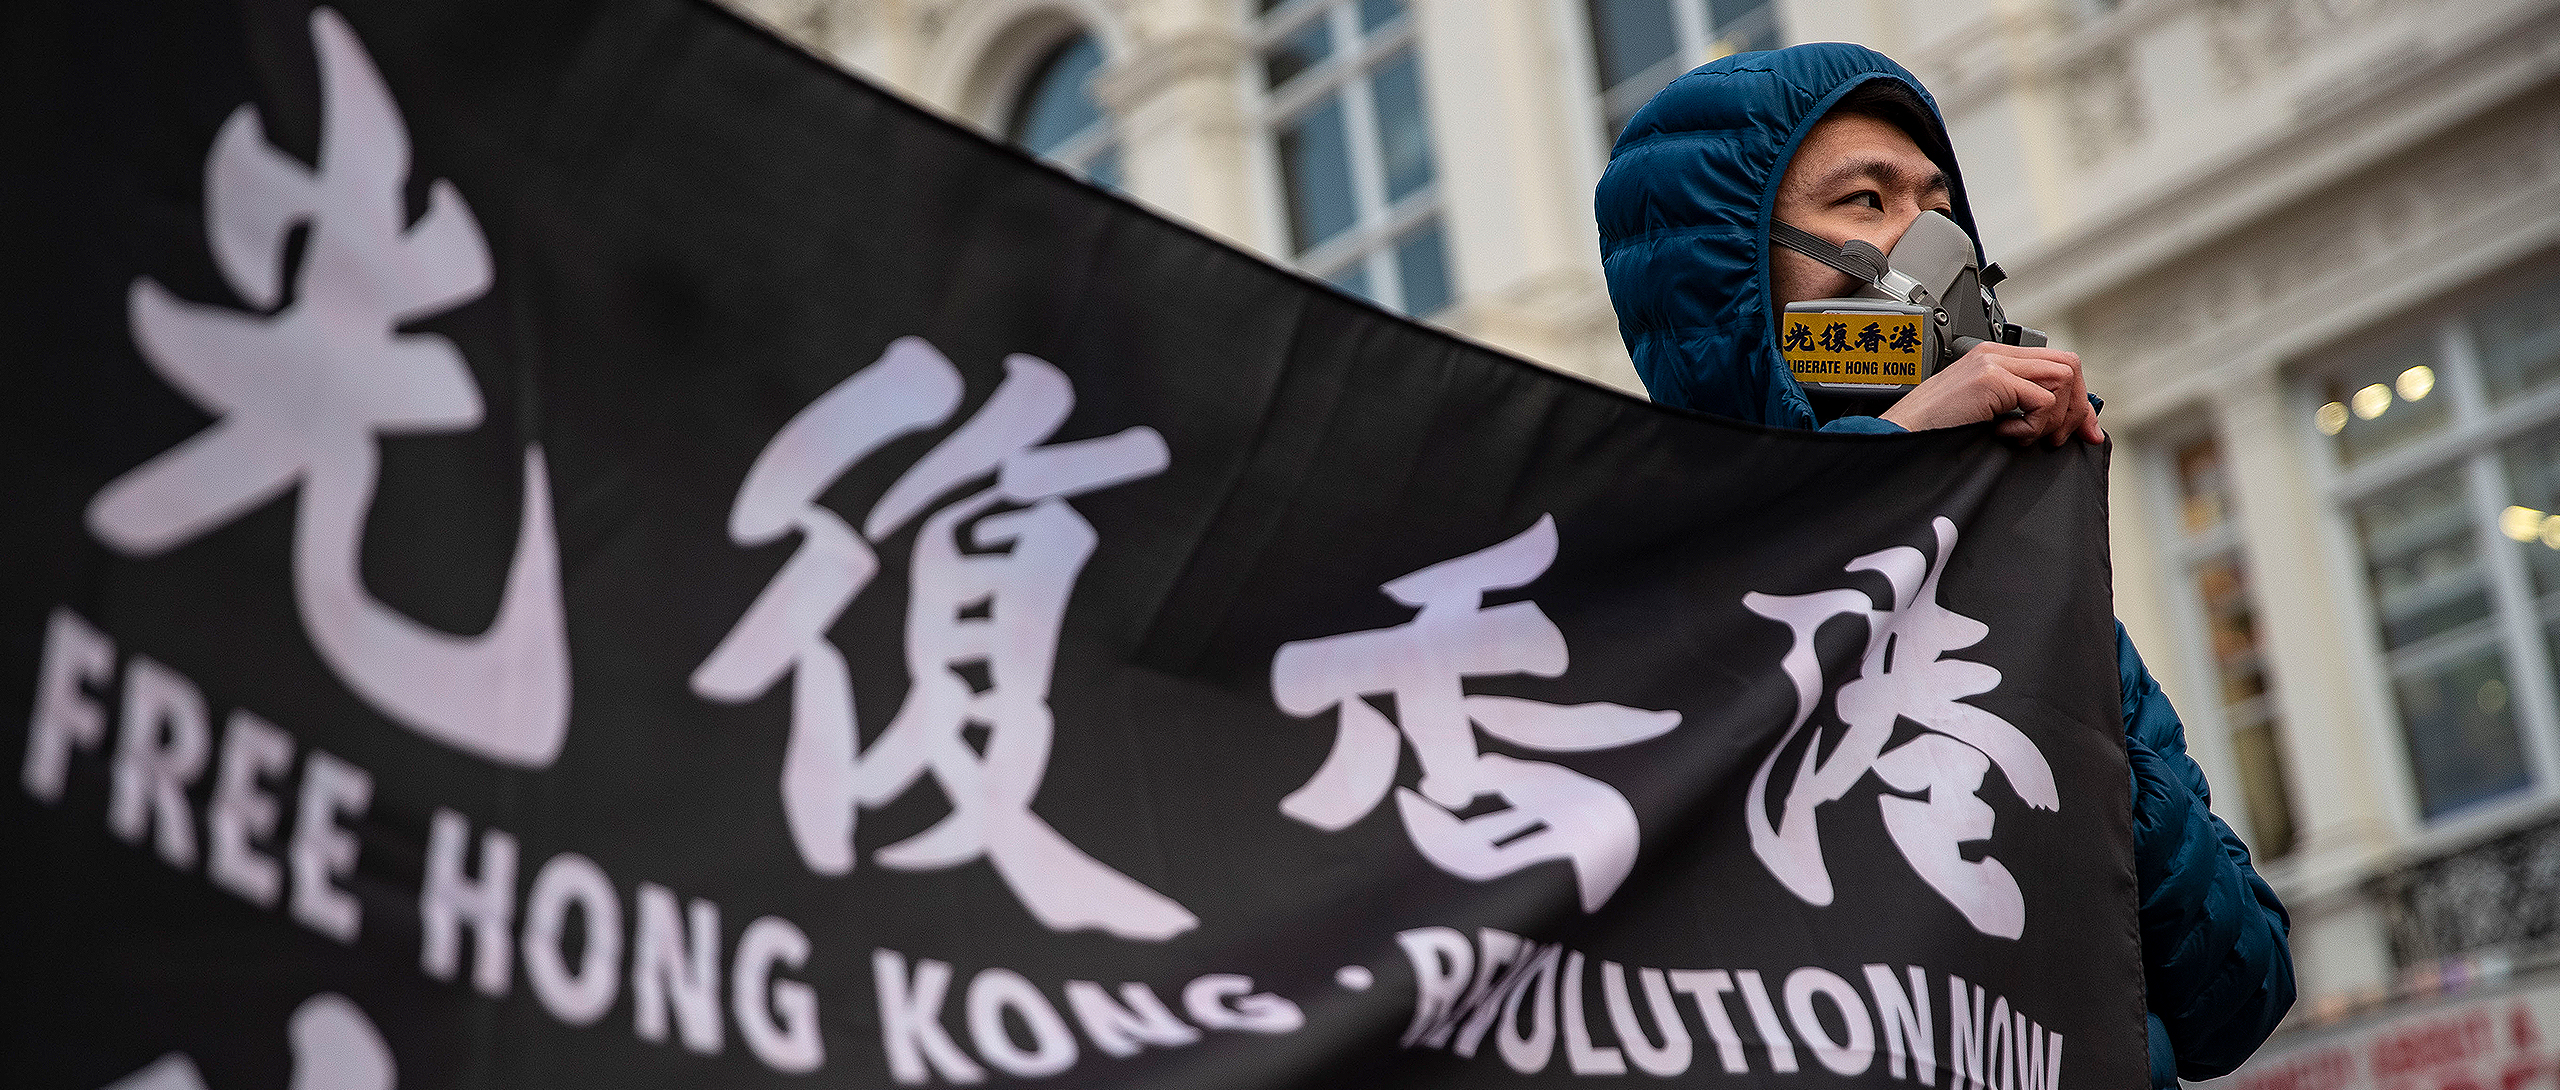 Photo showing a Hong Kong supporter holds a banned flag saying "Free Hong Kong, Revolution Now" during protests in Piccadilly Circus in London in March 2021. (May James/SOPA Images/LightRocket via Getty Images)